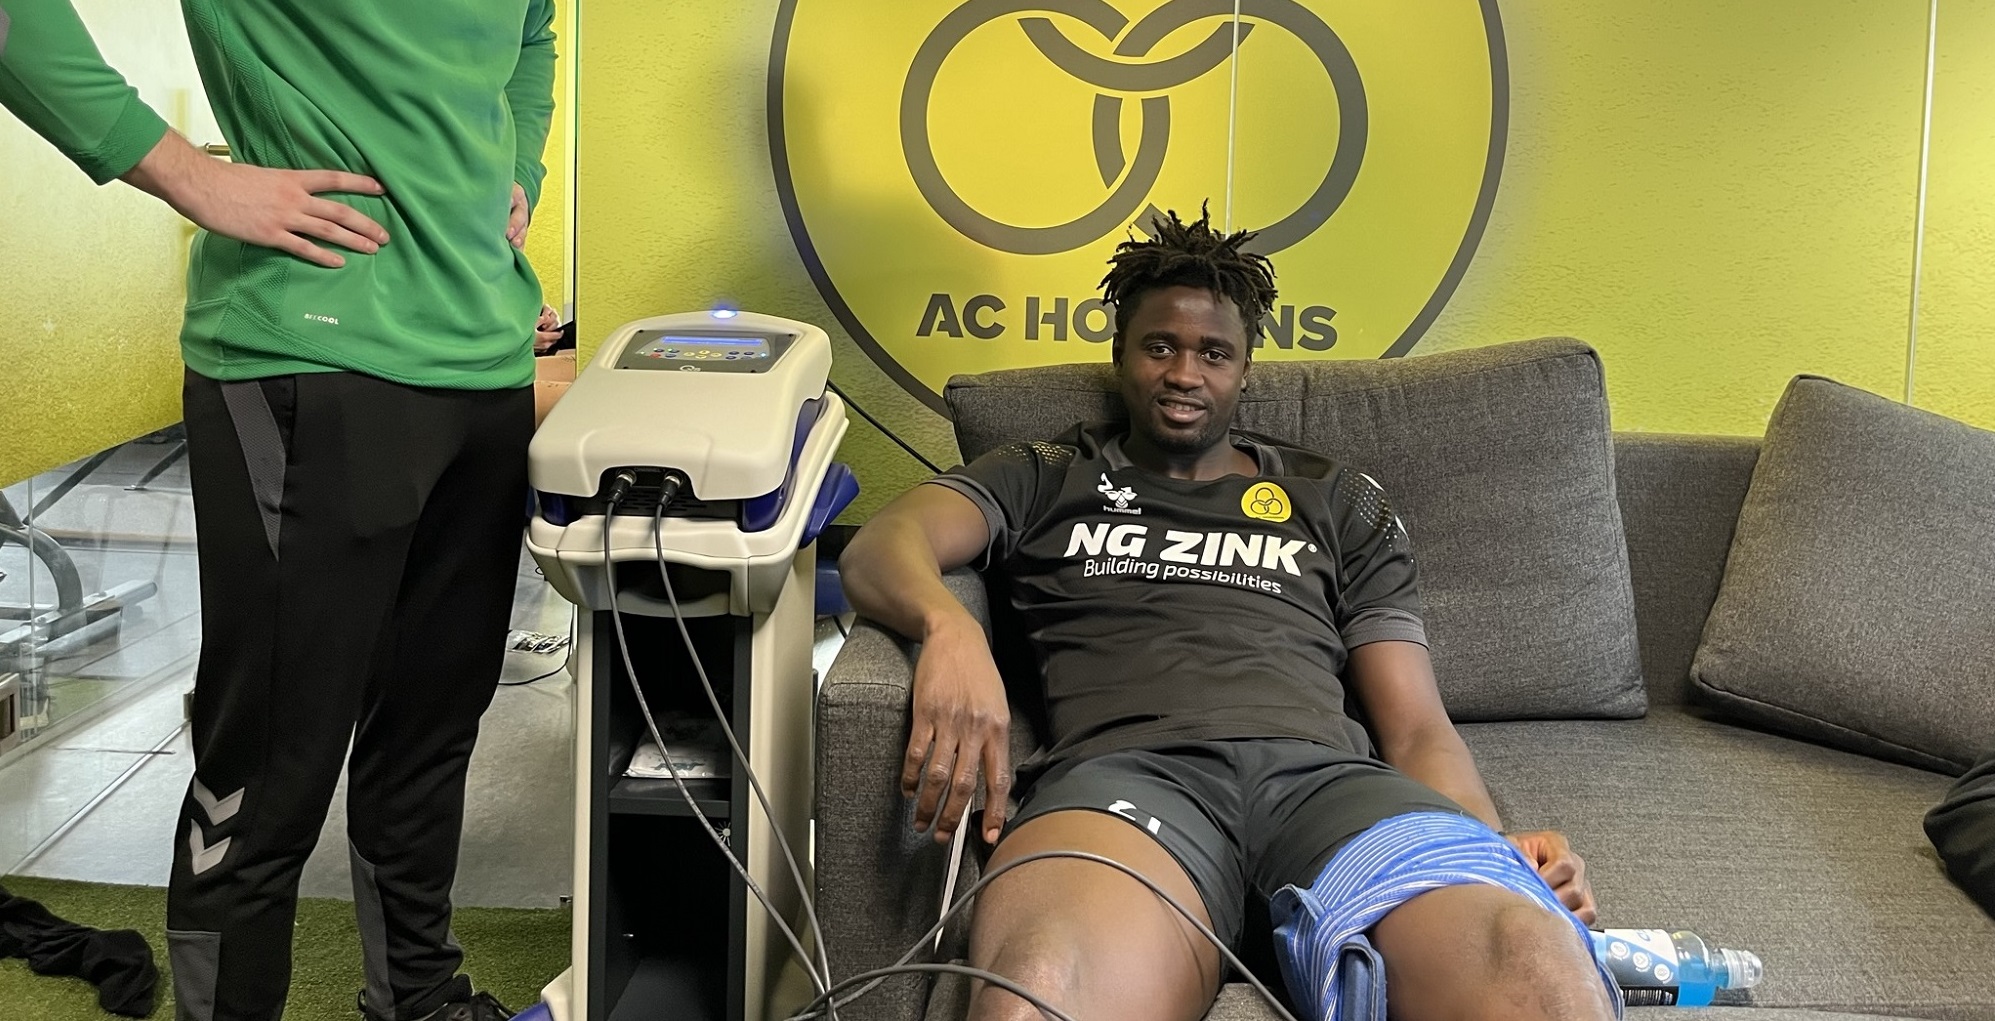 Magnetotherapy Qs at AC Horsens